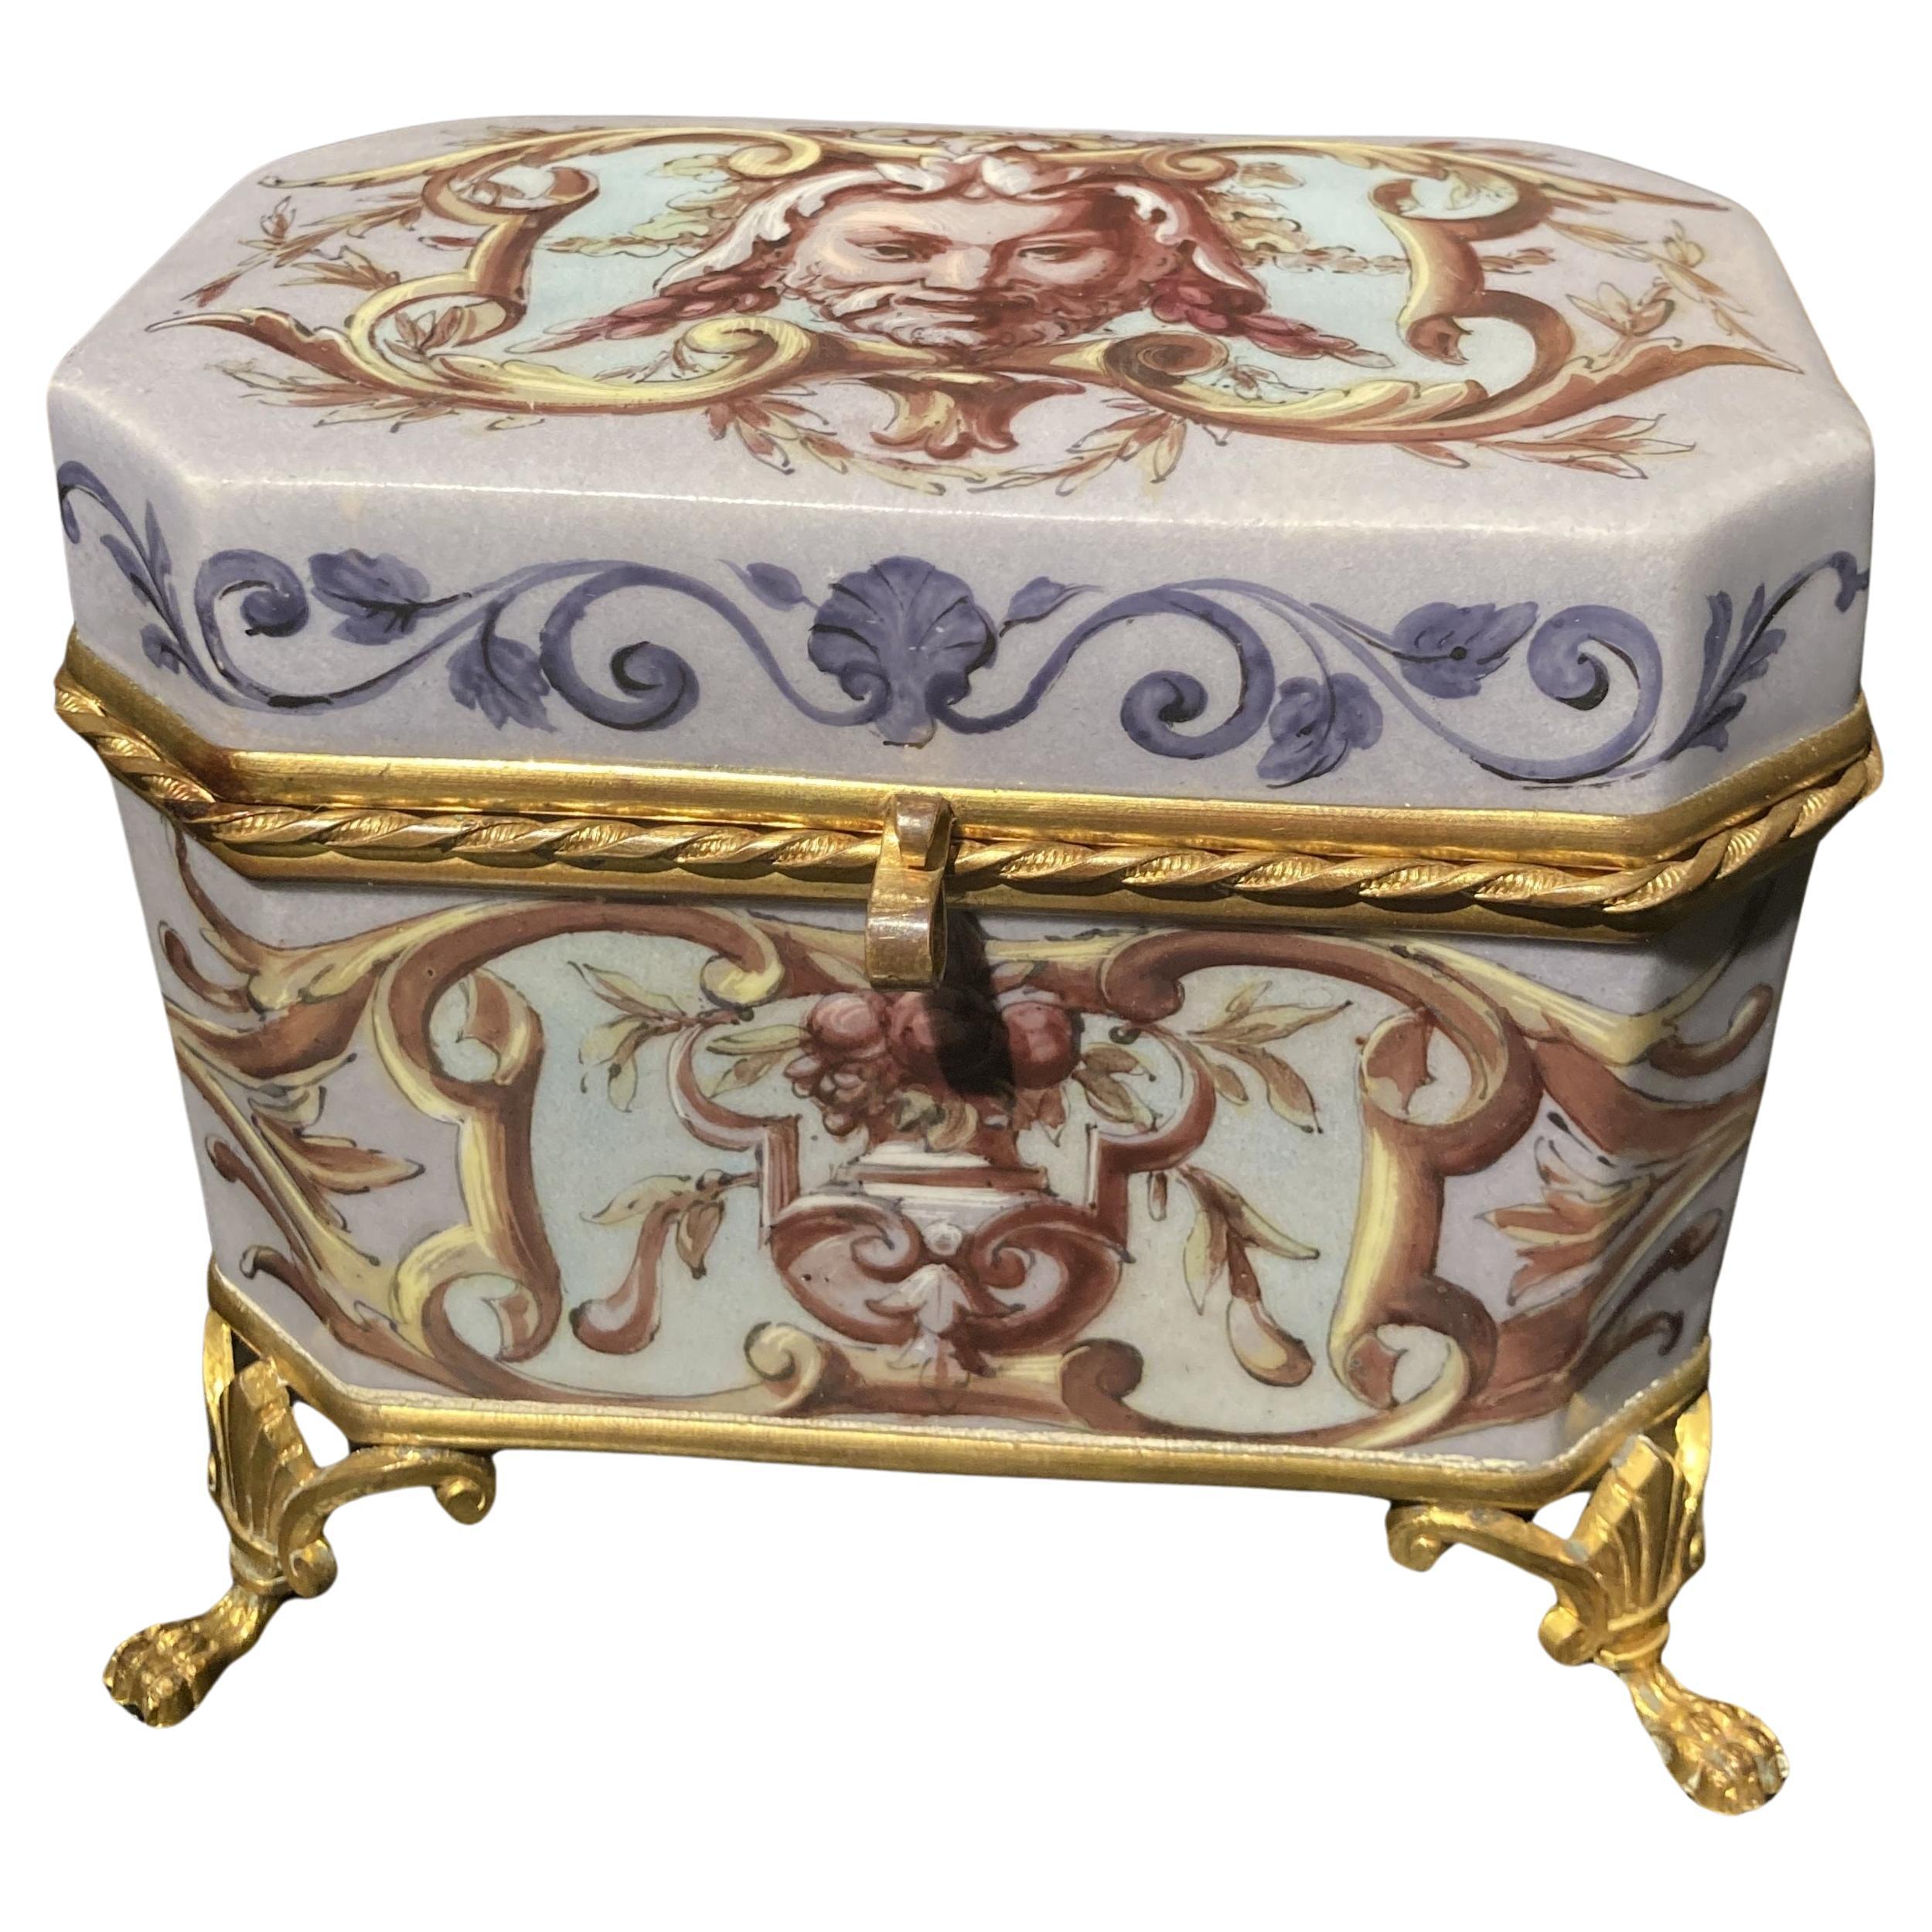 French 19th Century Empire Porcelain and Gilt Bronze Decorative Jewelry Box